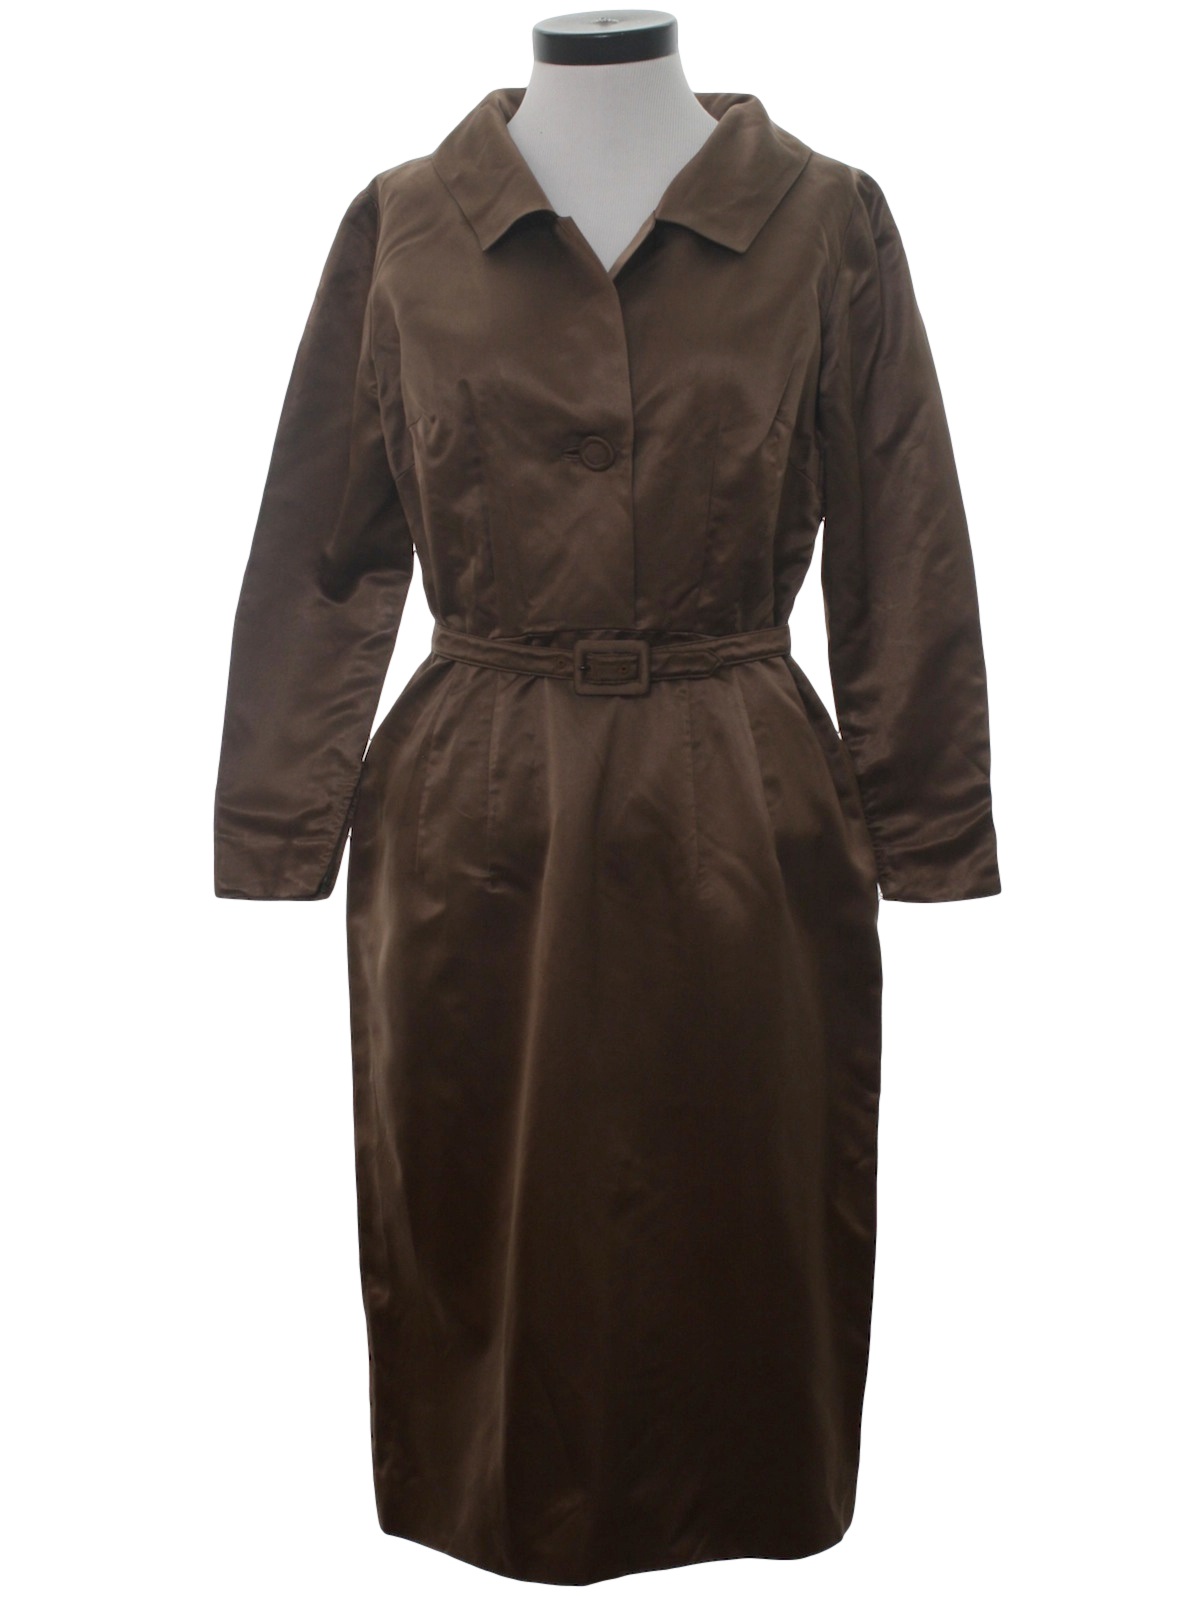 1950s Vintage Dress: 50s -Missing Label- Womens brown background shiny ...